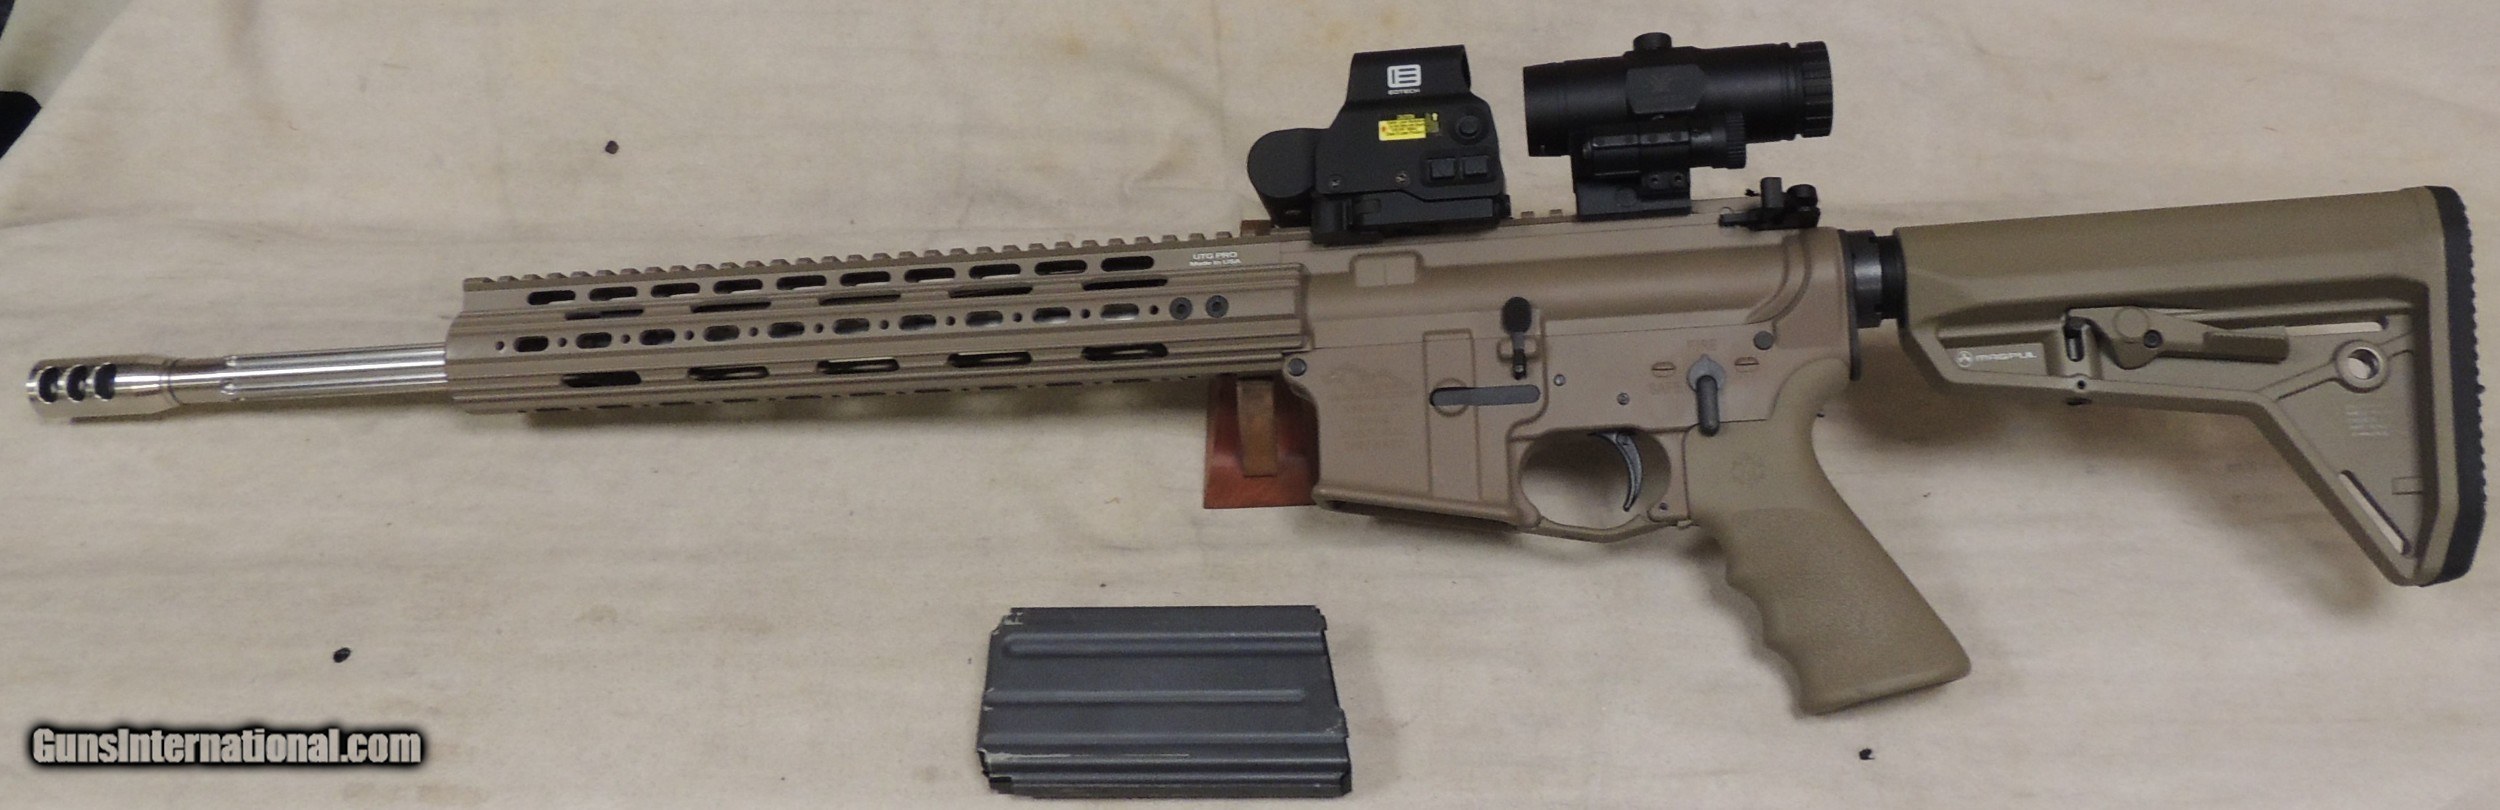 Desert Tan AR-15: The Ultimate Rifle for Desert Enthusiasts - News Military